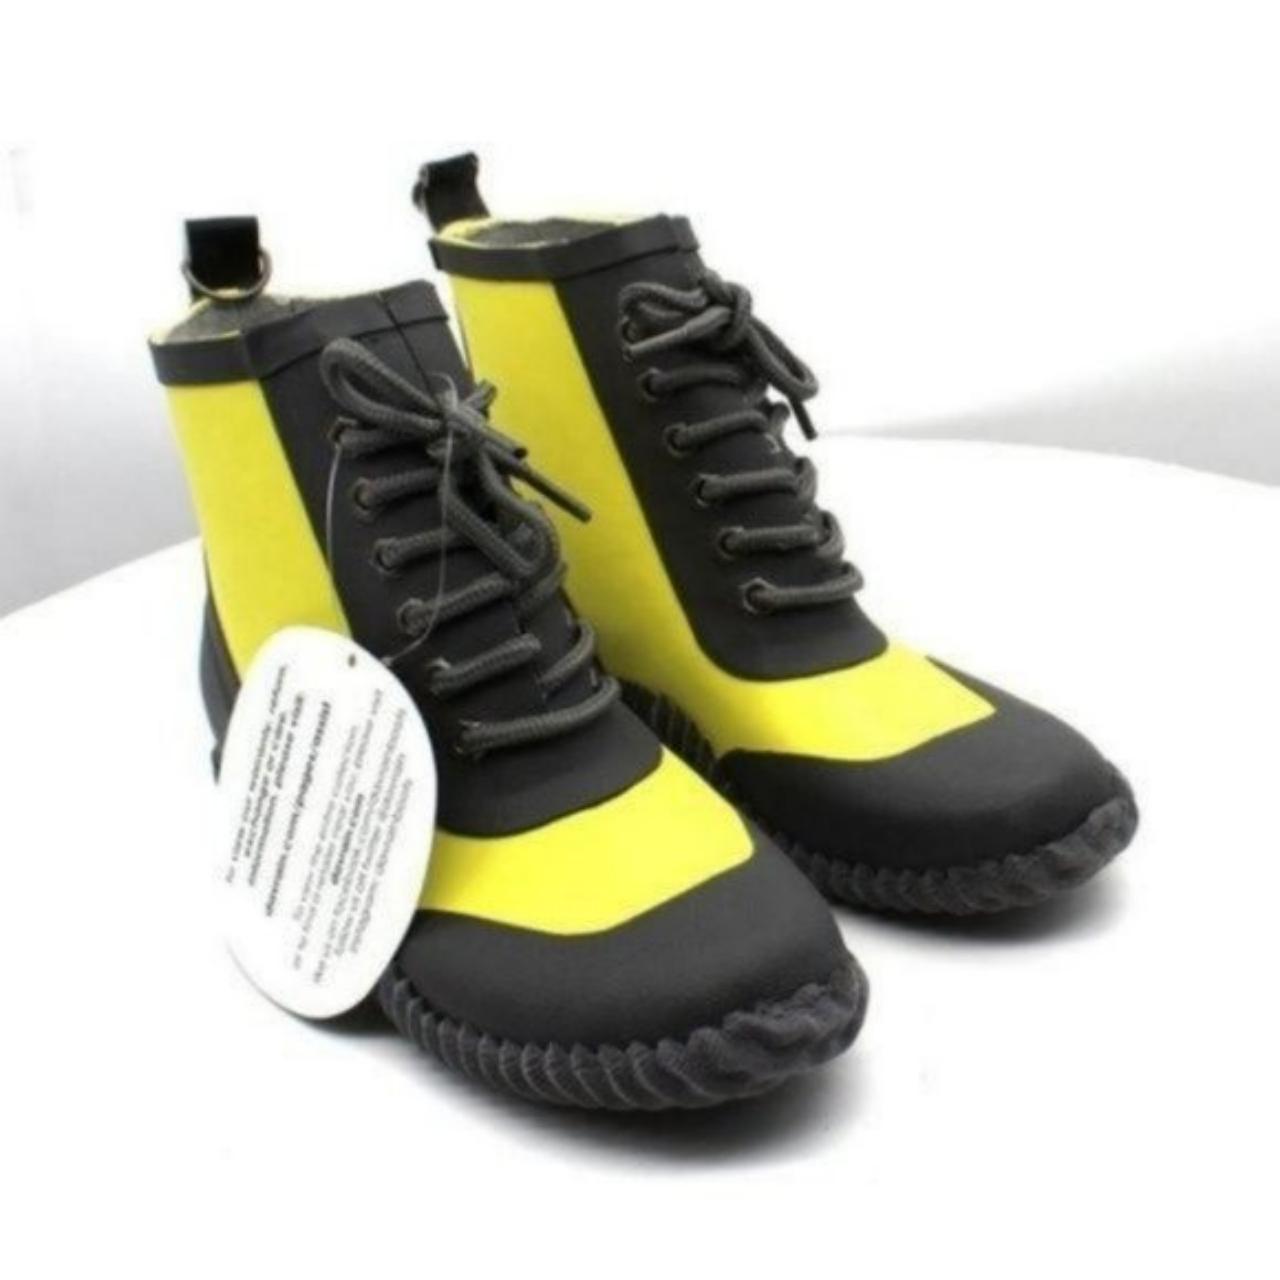 Däv Women's Yellow and Black Boots (2)